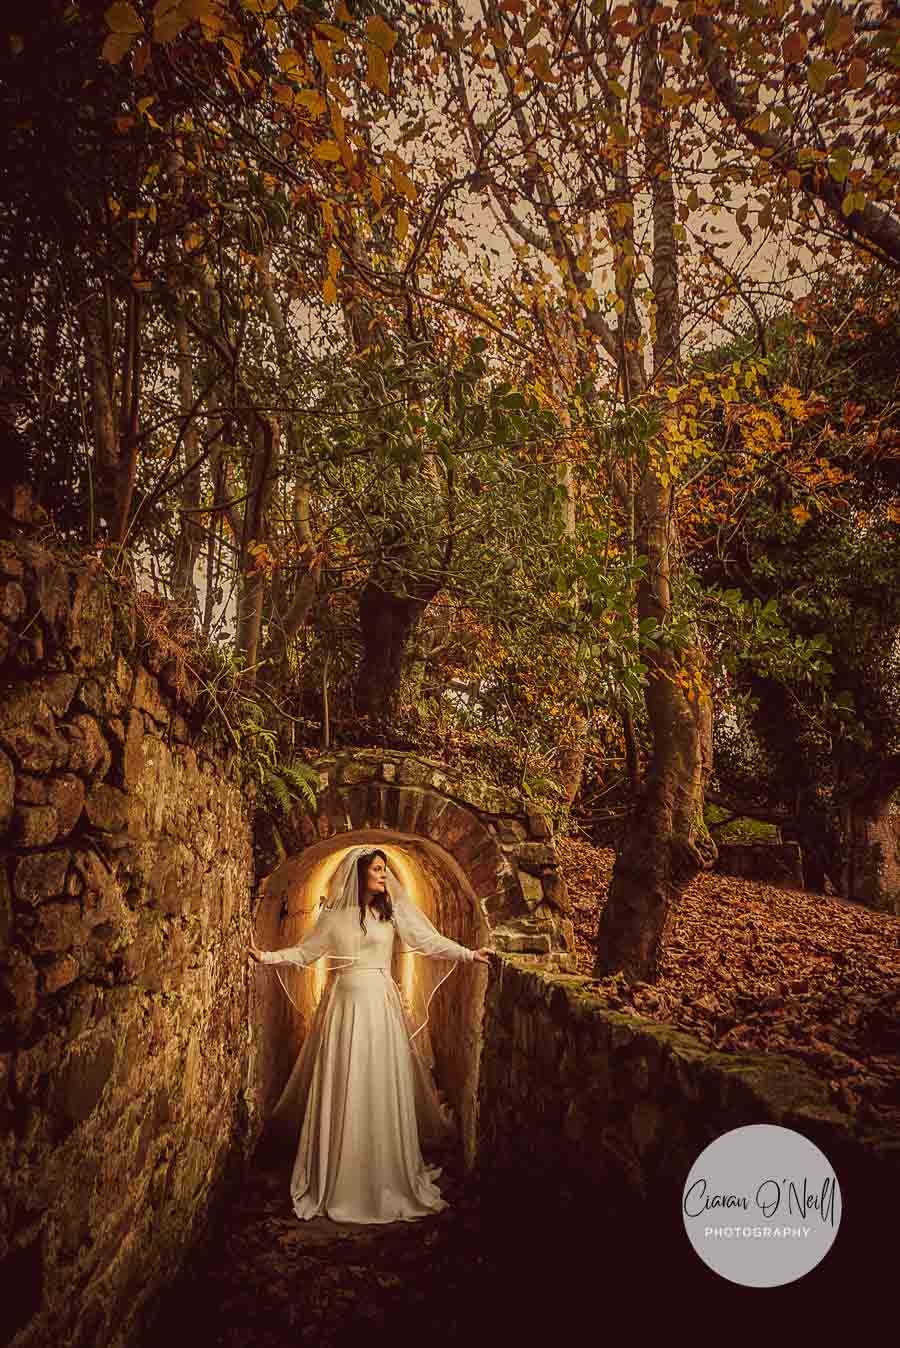 Autumn tones surround our a beautiful bride as she stands outside a tunnel